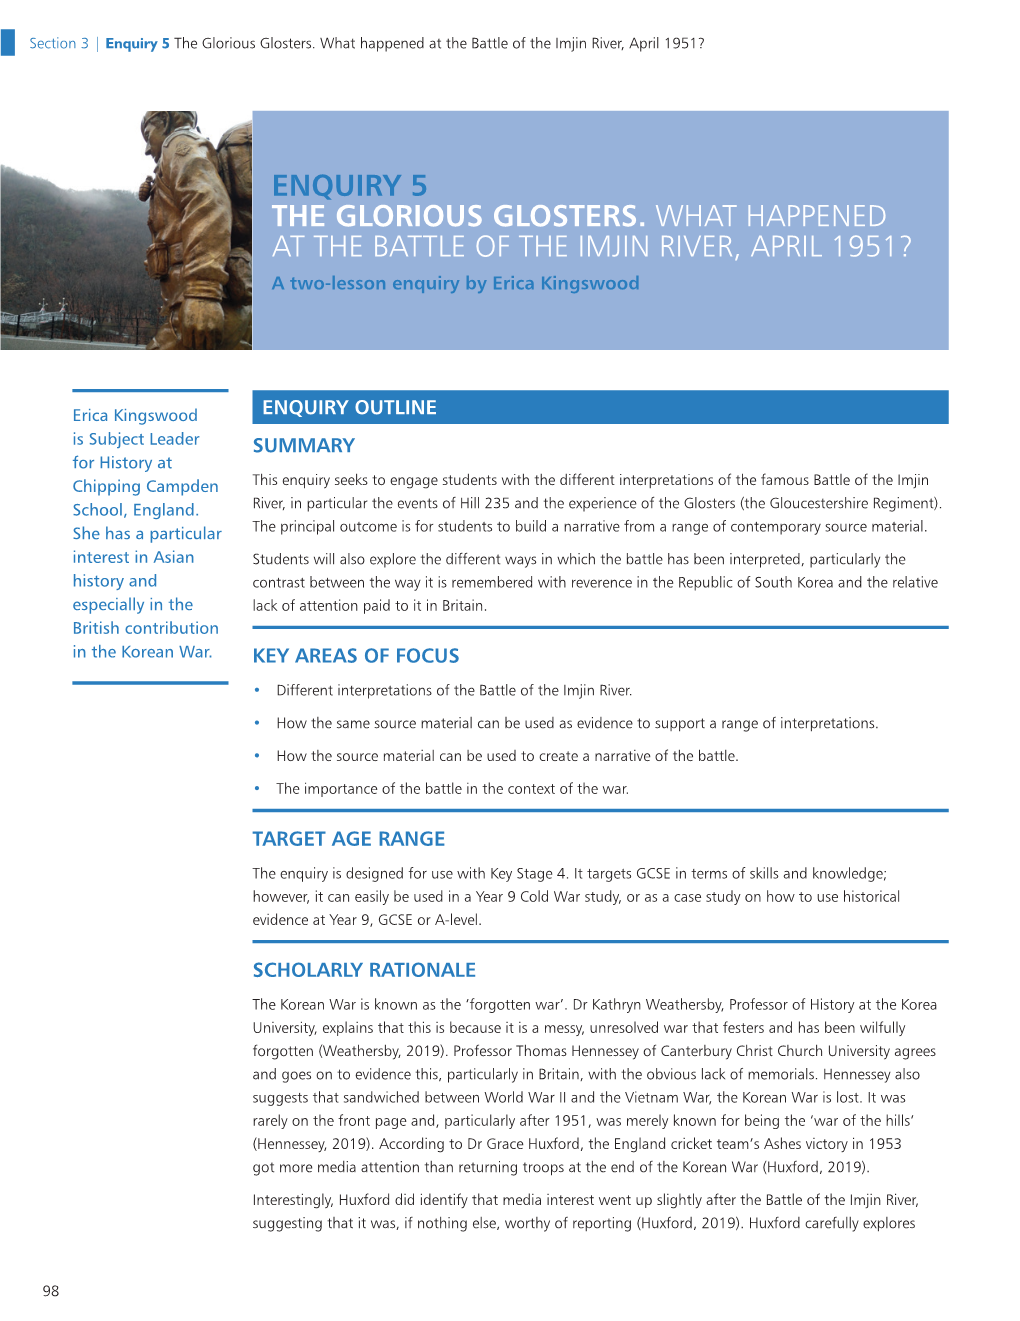 Enquiry 5: the Glorious Glosters. What Happened at the Battle of The